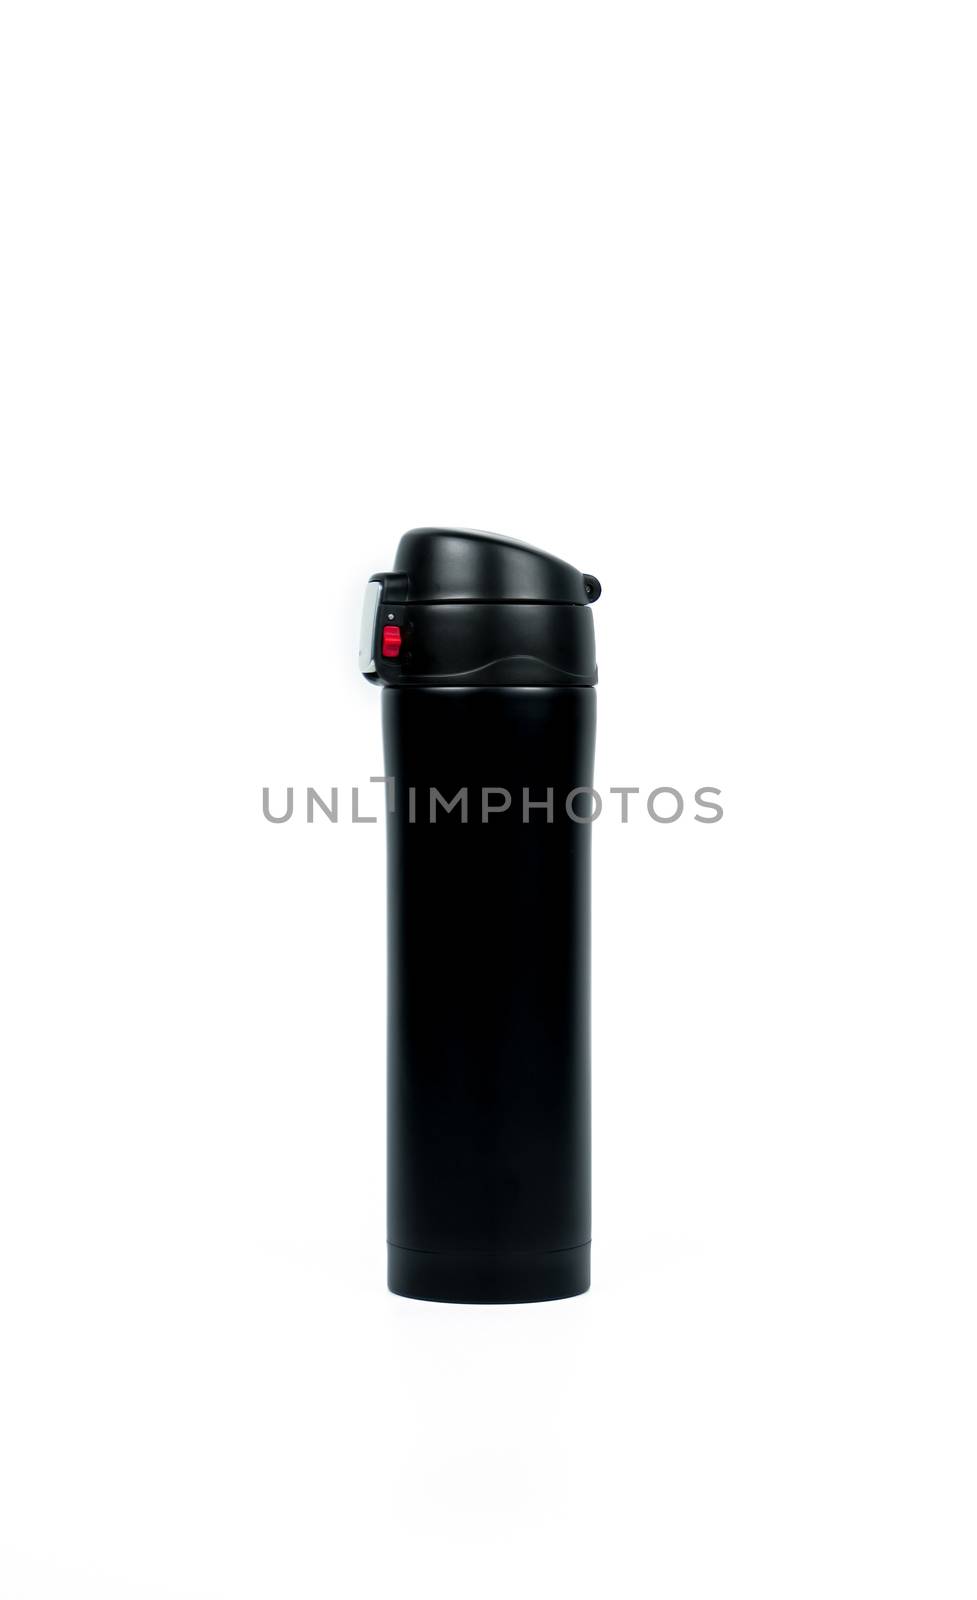 Black thermos bottle isolated on white background with copy space. Beverage container. Coffee and tea bottle.